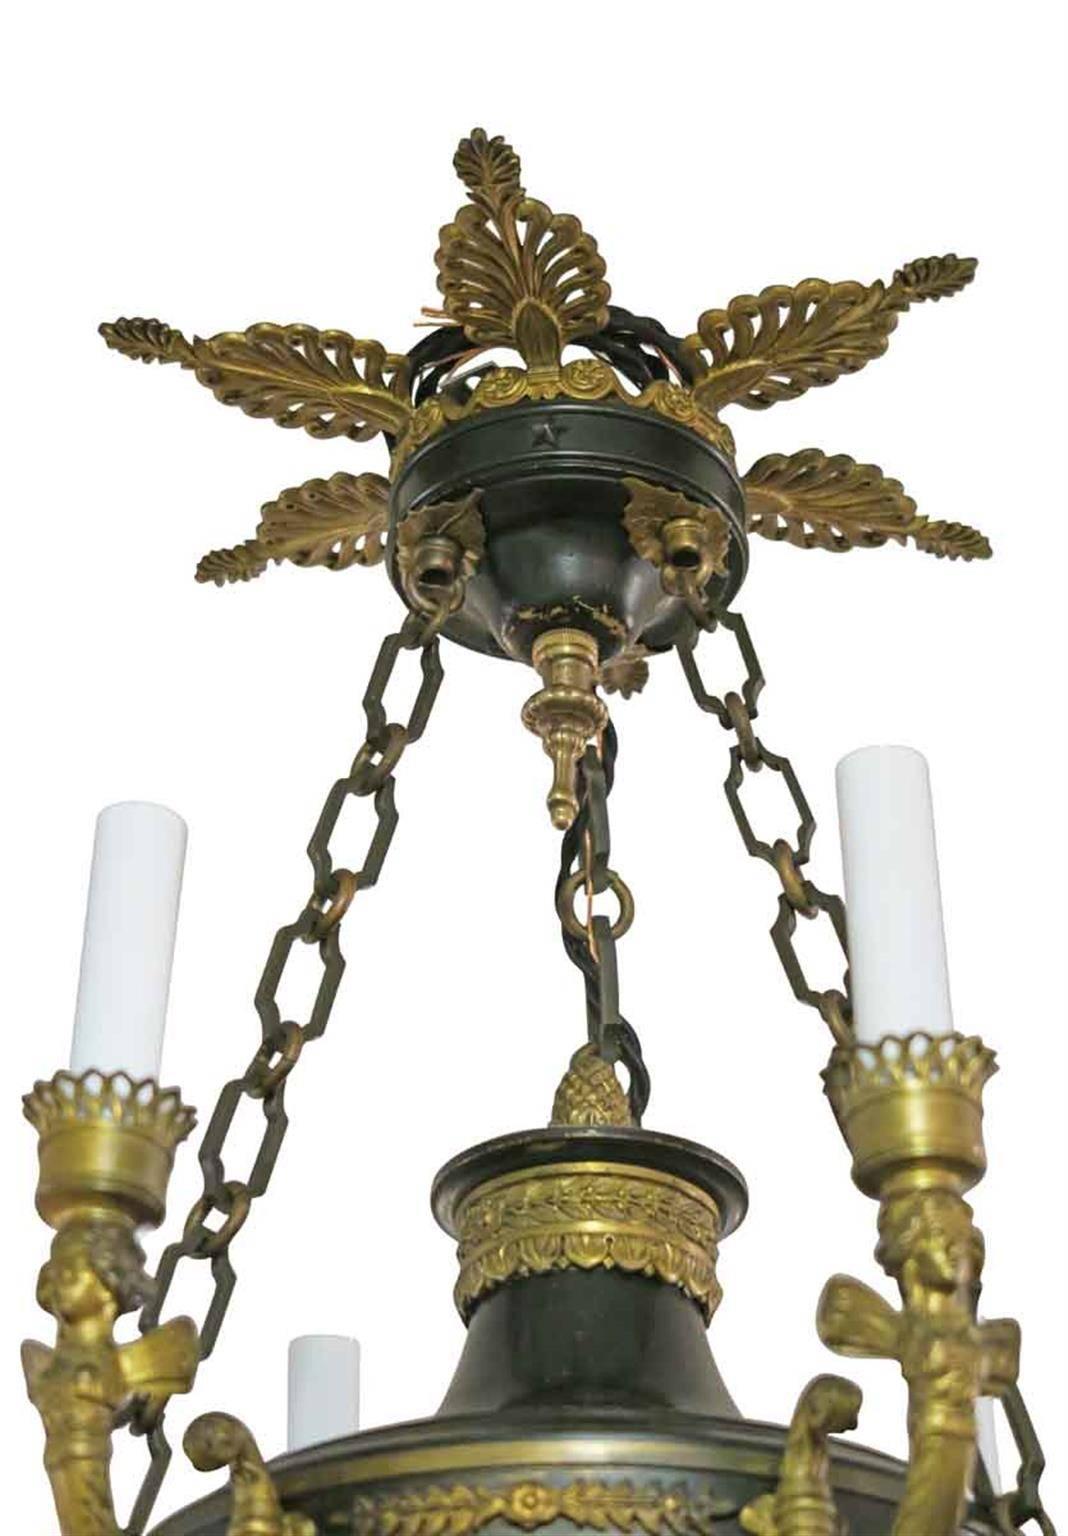 This French six-light chandelier is fashioned out of gilt bronze and is presented in an Empire style, circa 1900s. Arms come adorned with angels, bottom acorn finial. This can be seen at our 302 Bowery location in Manhattan.